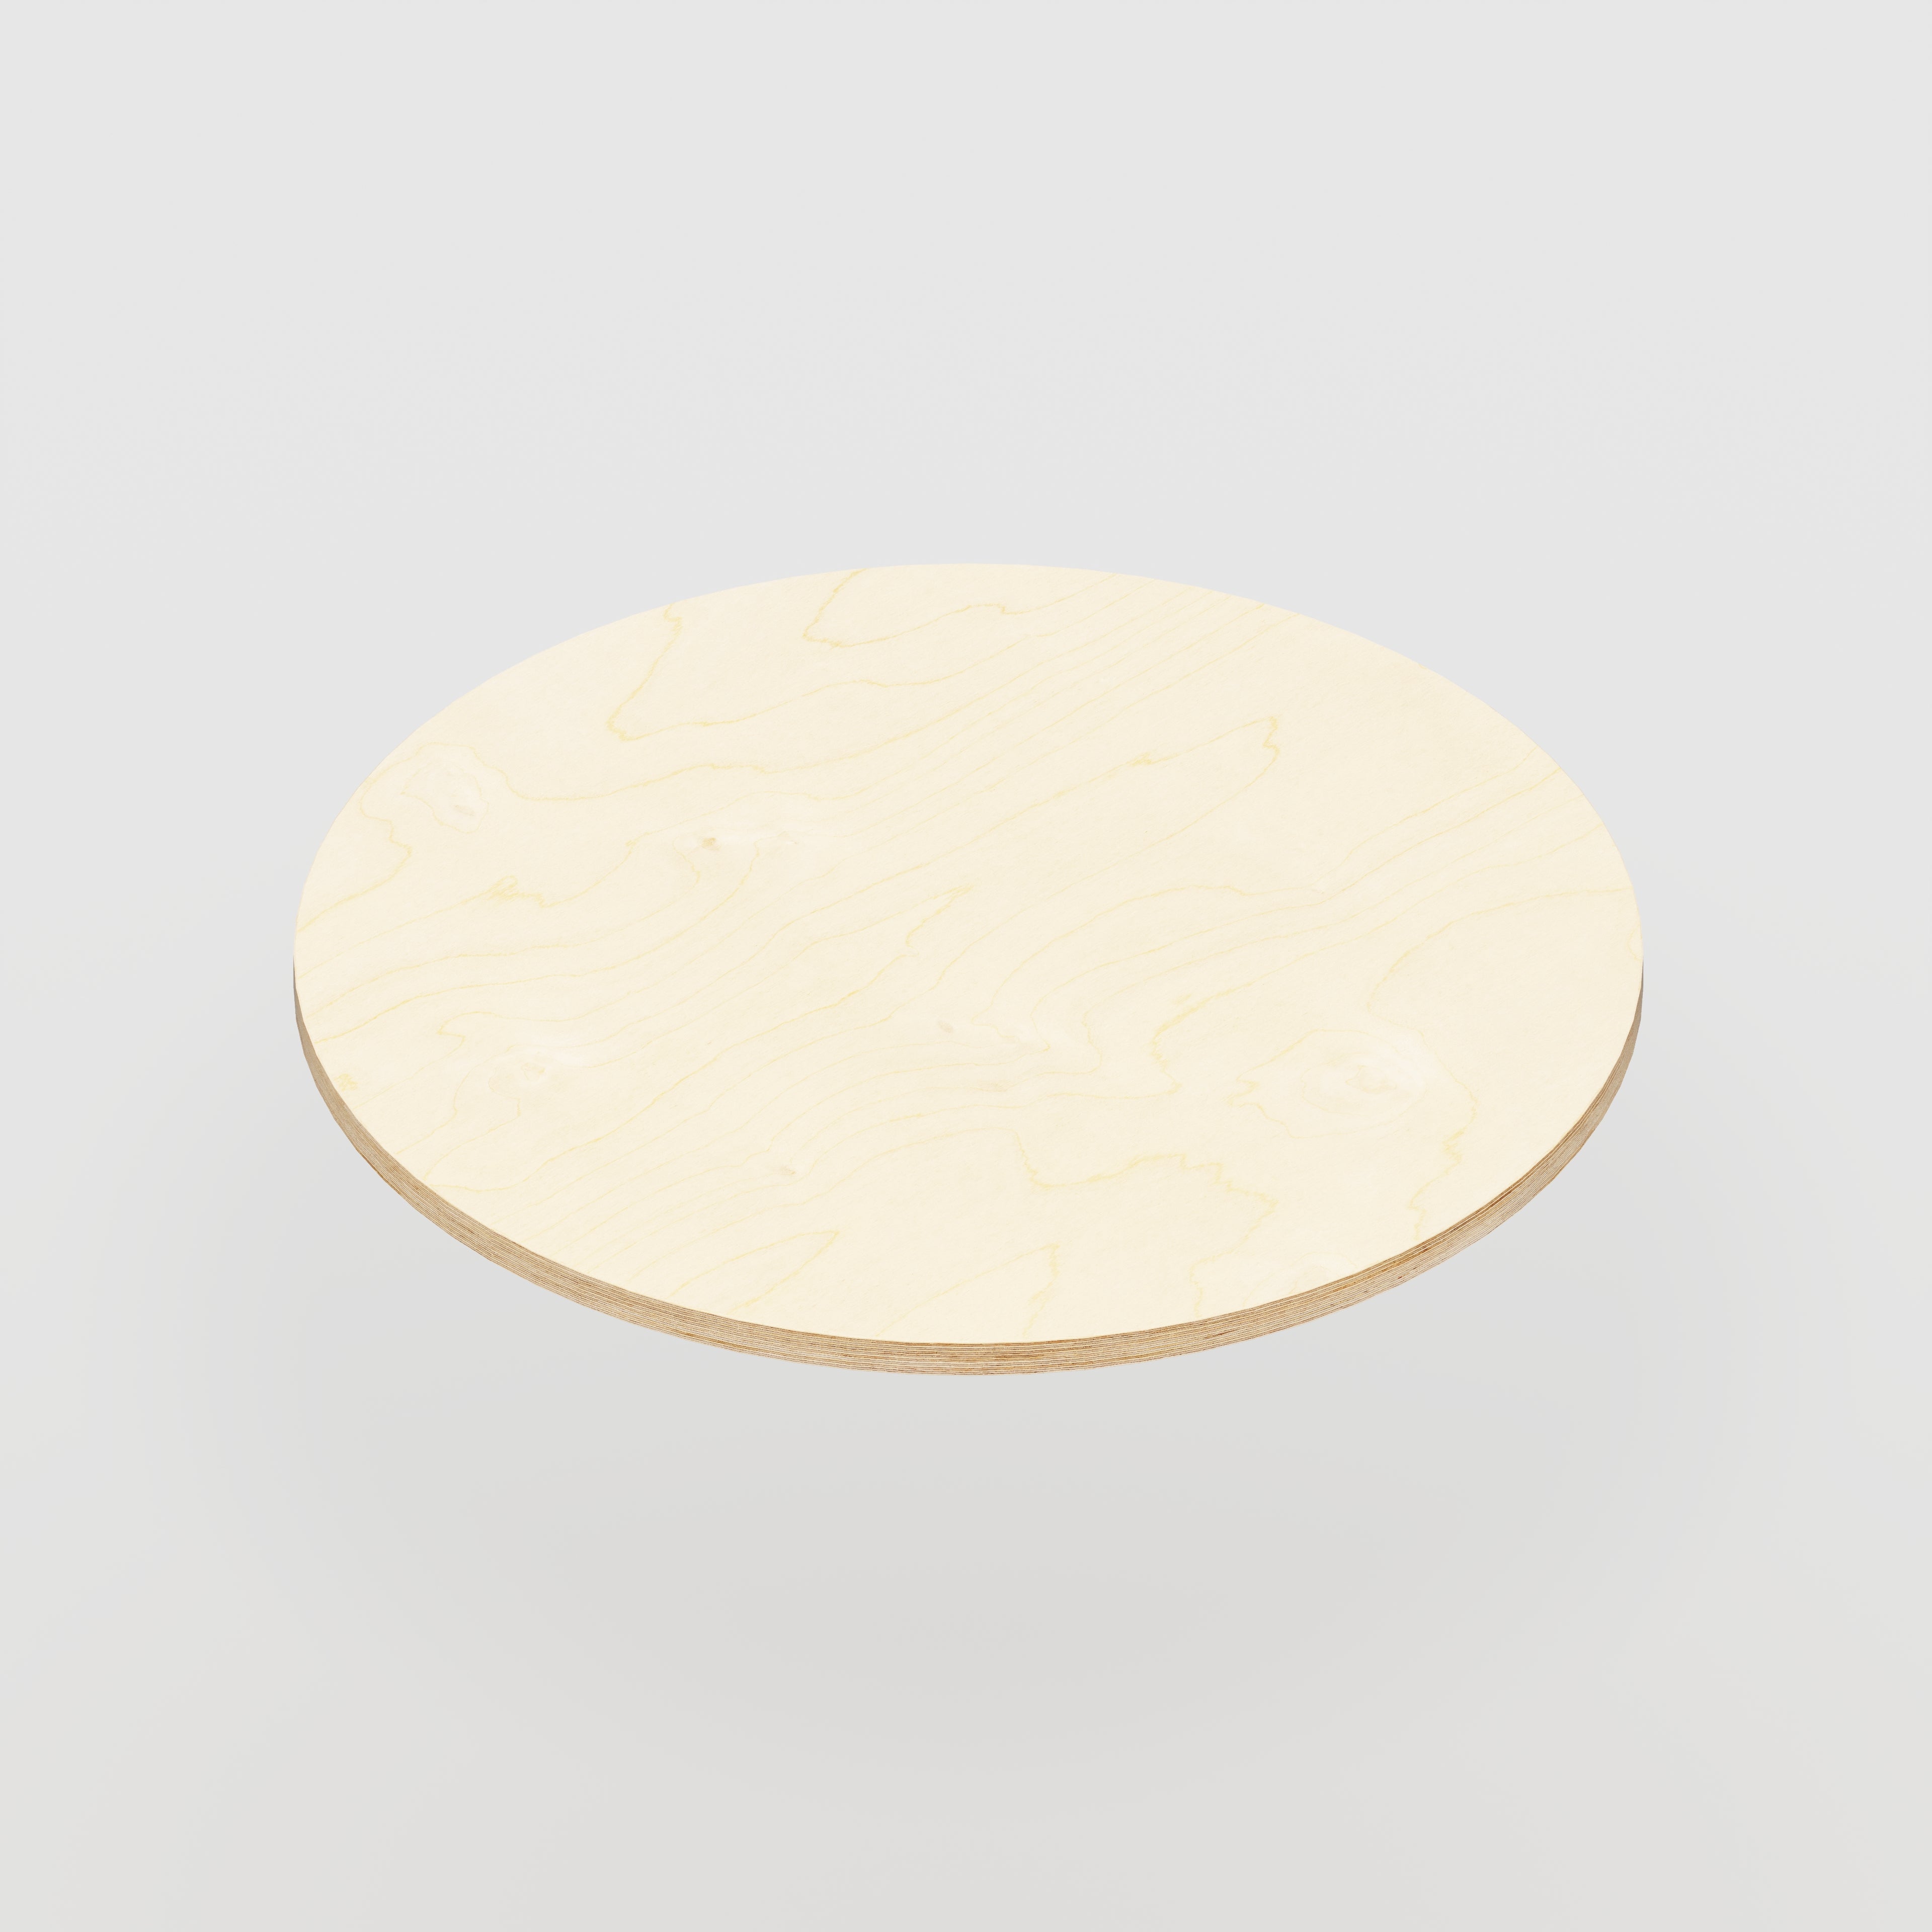 Plywood Round Tabletop - Plywood Birch - 800(dia) - 24mm